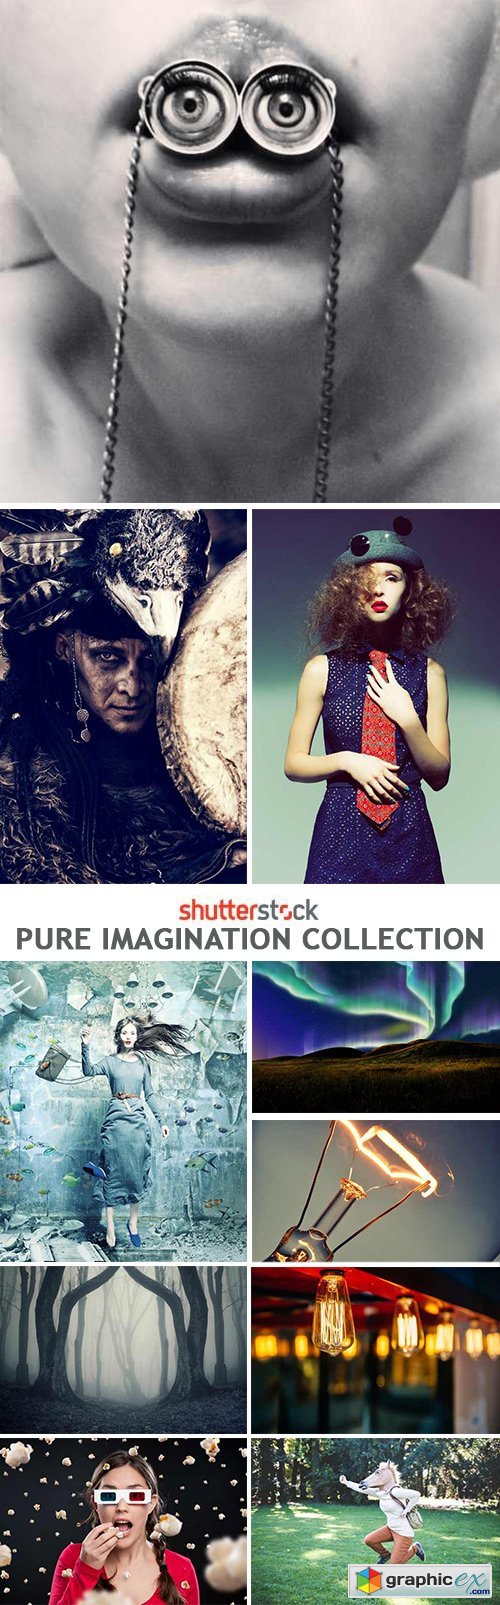 Pure Imagination Collection - 25xJPG